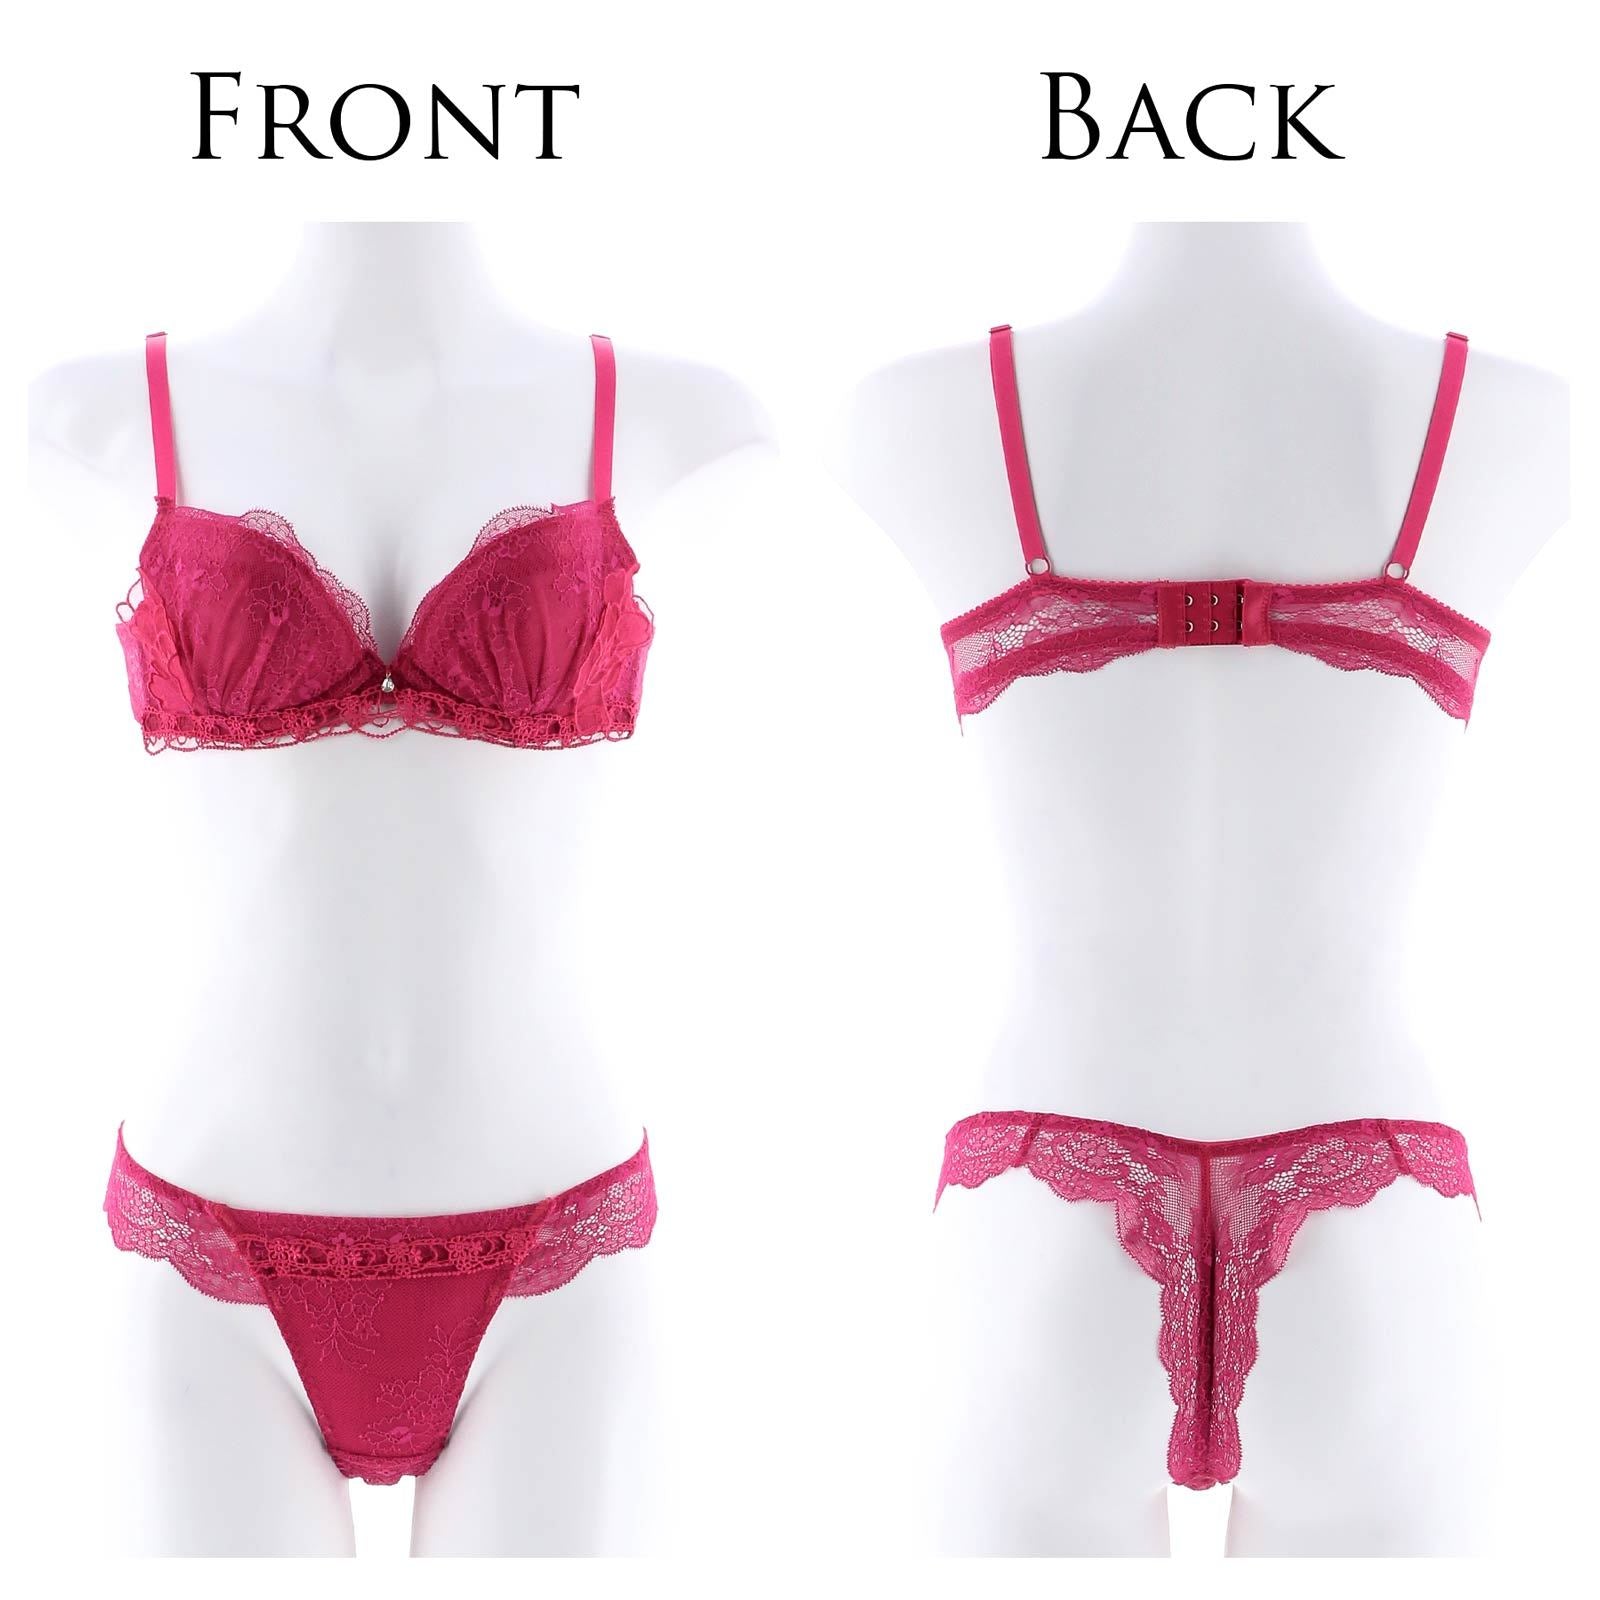 Airy Flower Lace Bra&T-back / Pink エアリーフラワーレースブラ&Tバック / ピンク